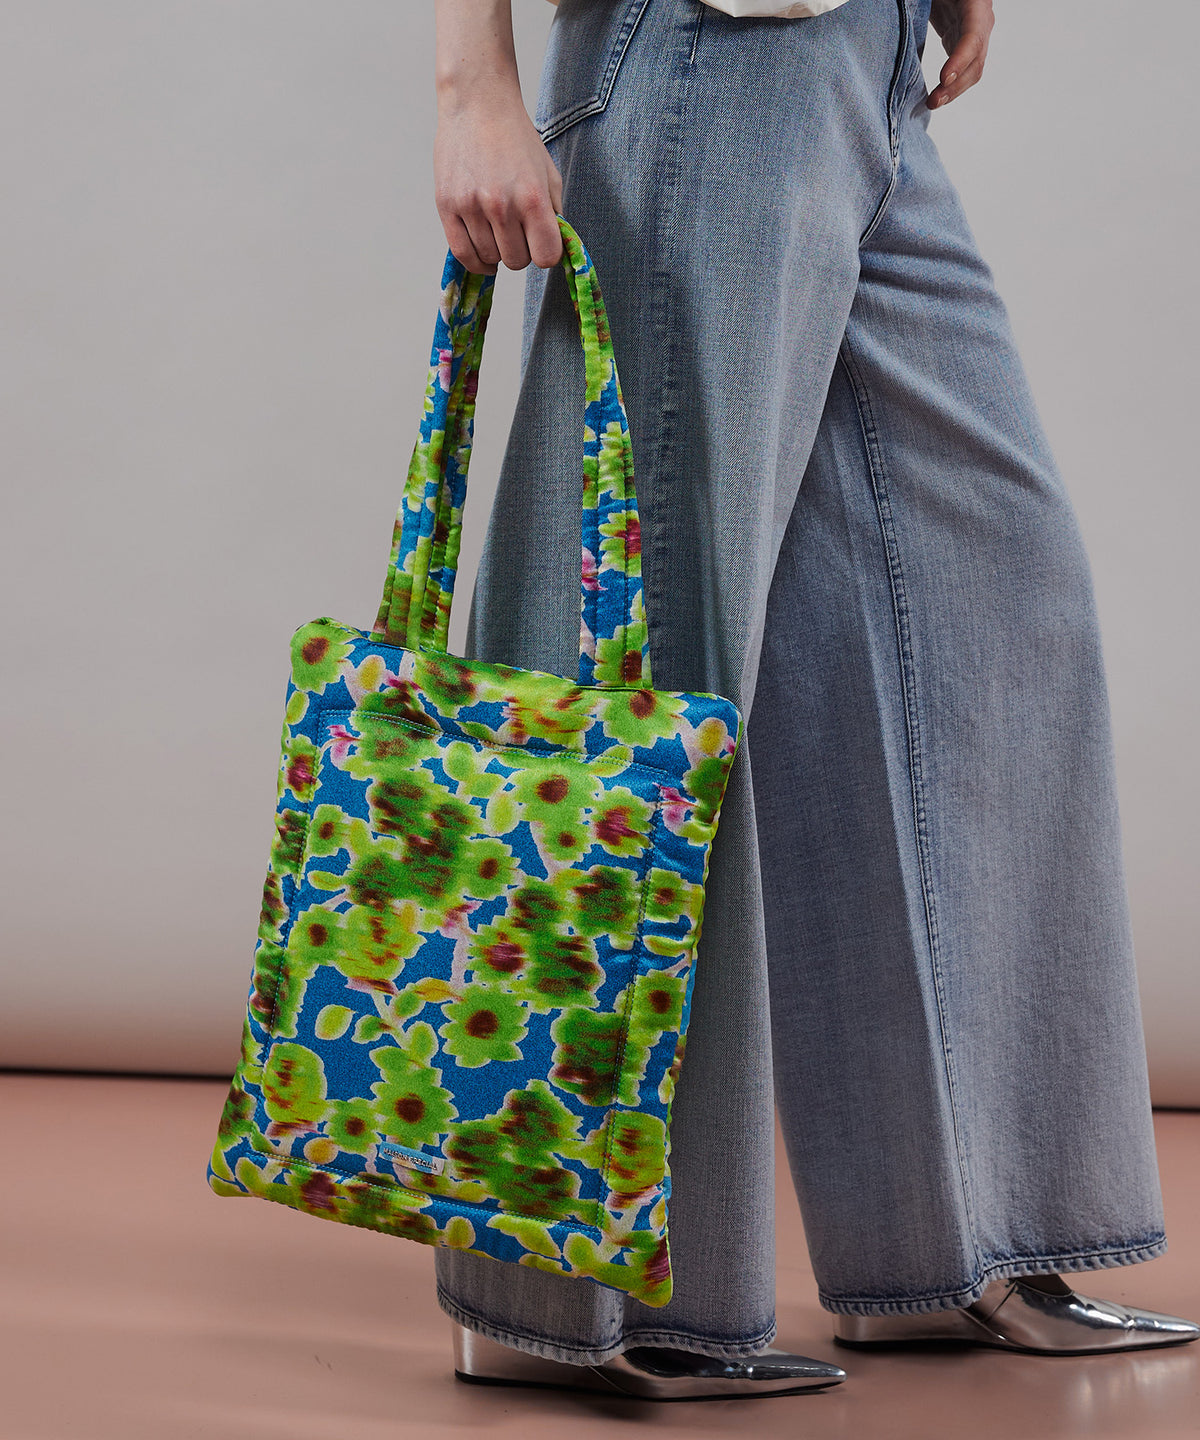 Floral Pattern Puffer Tote Bag